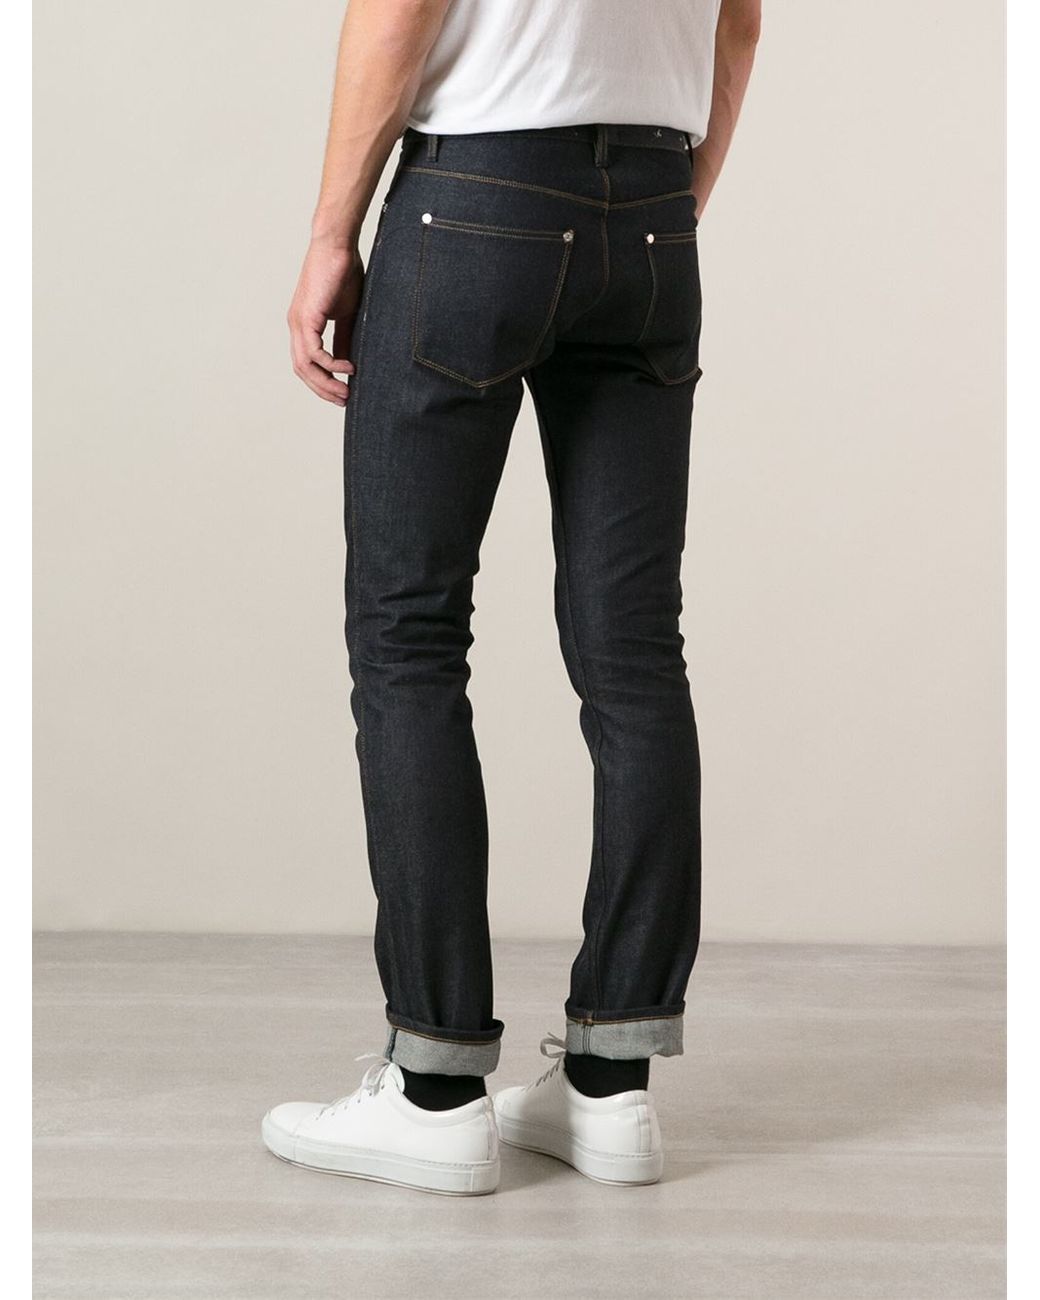 Acne Studios 'Max Raw' Jeans in Brown for Men | Lyst